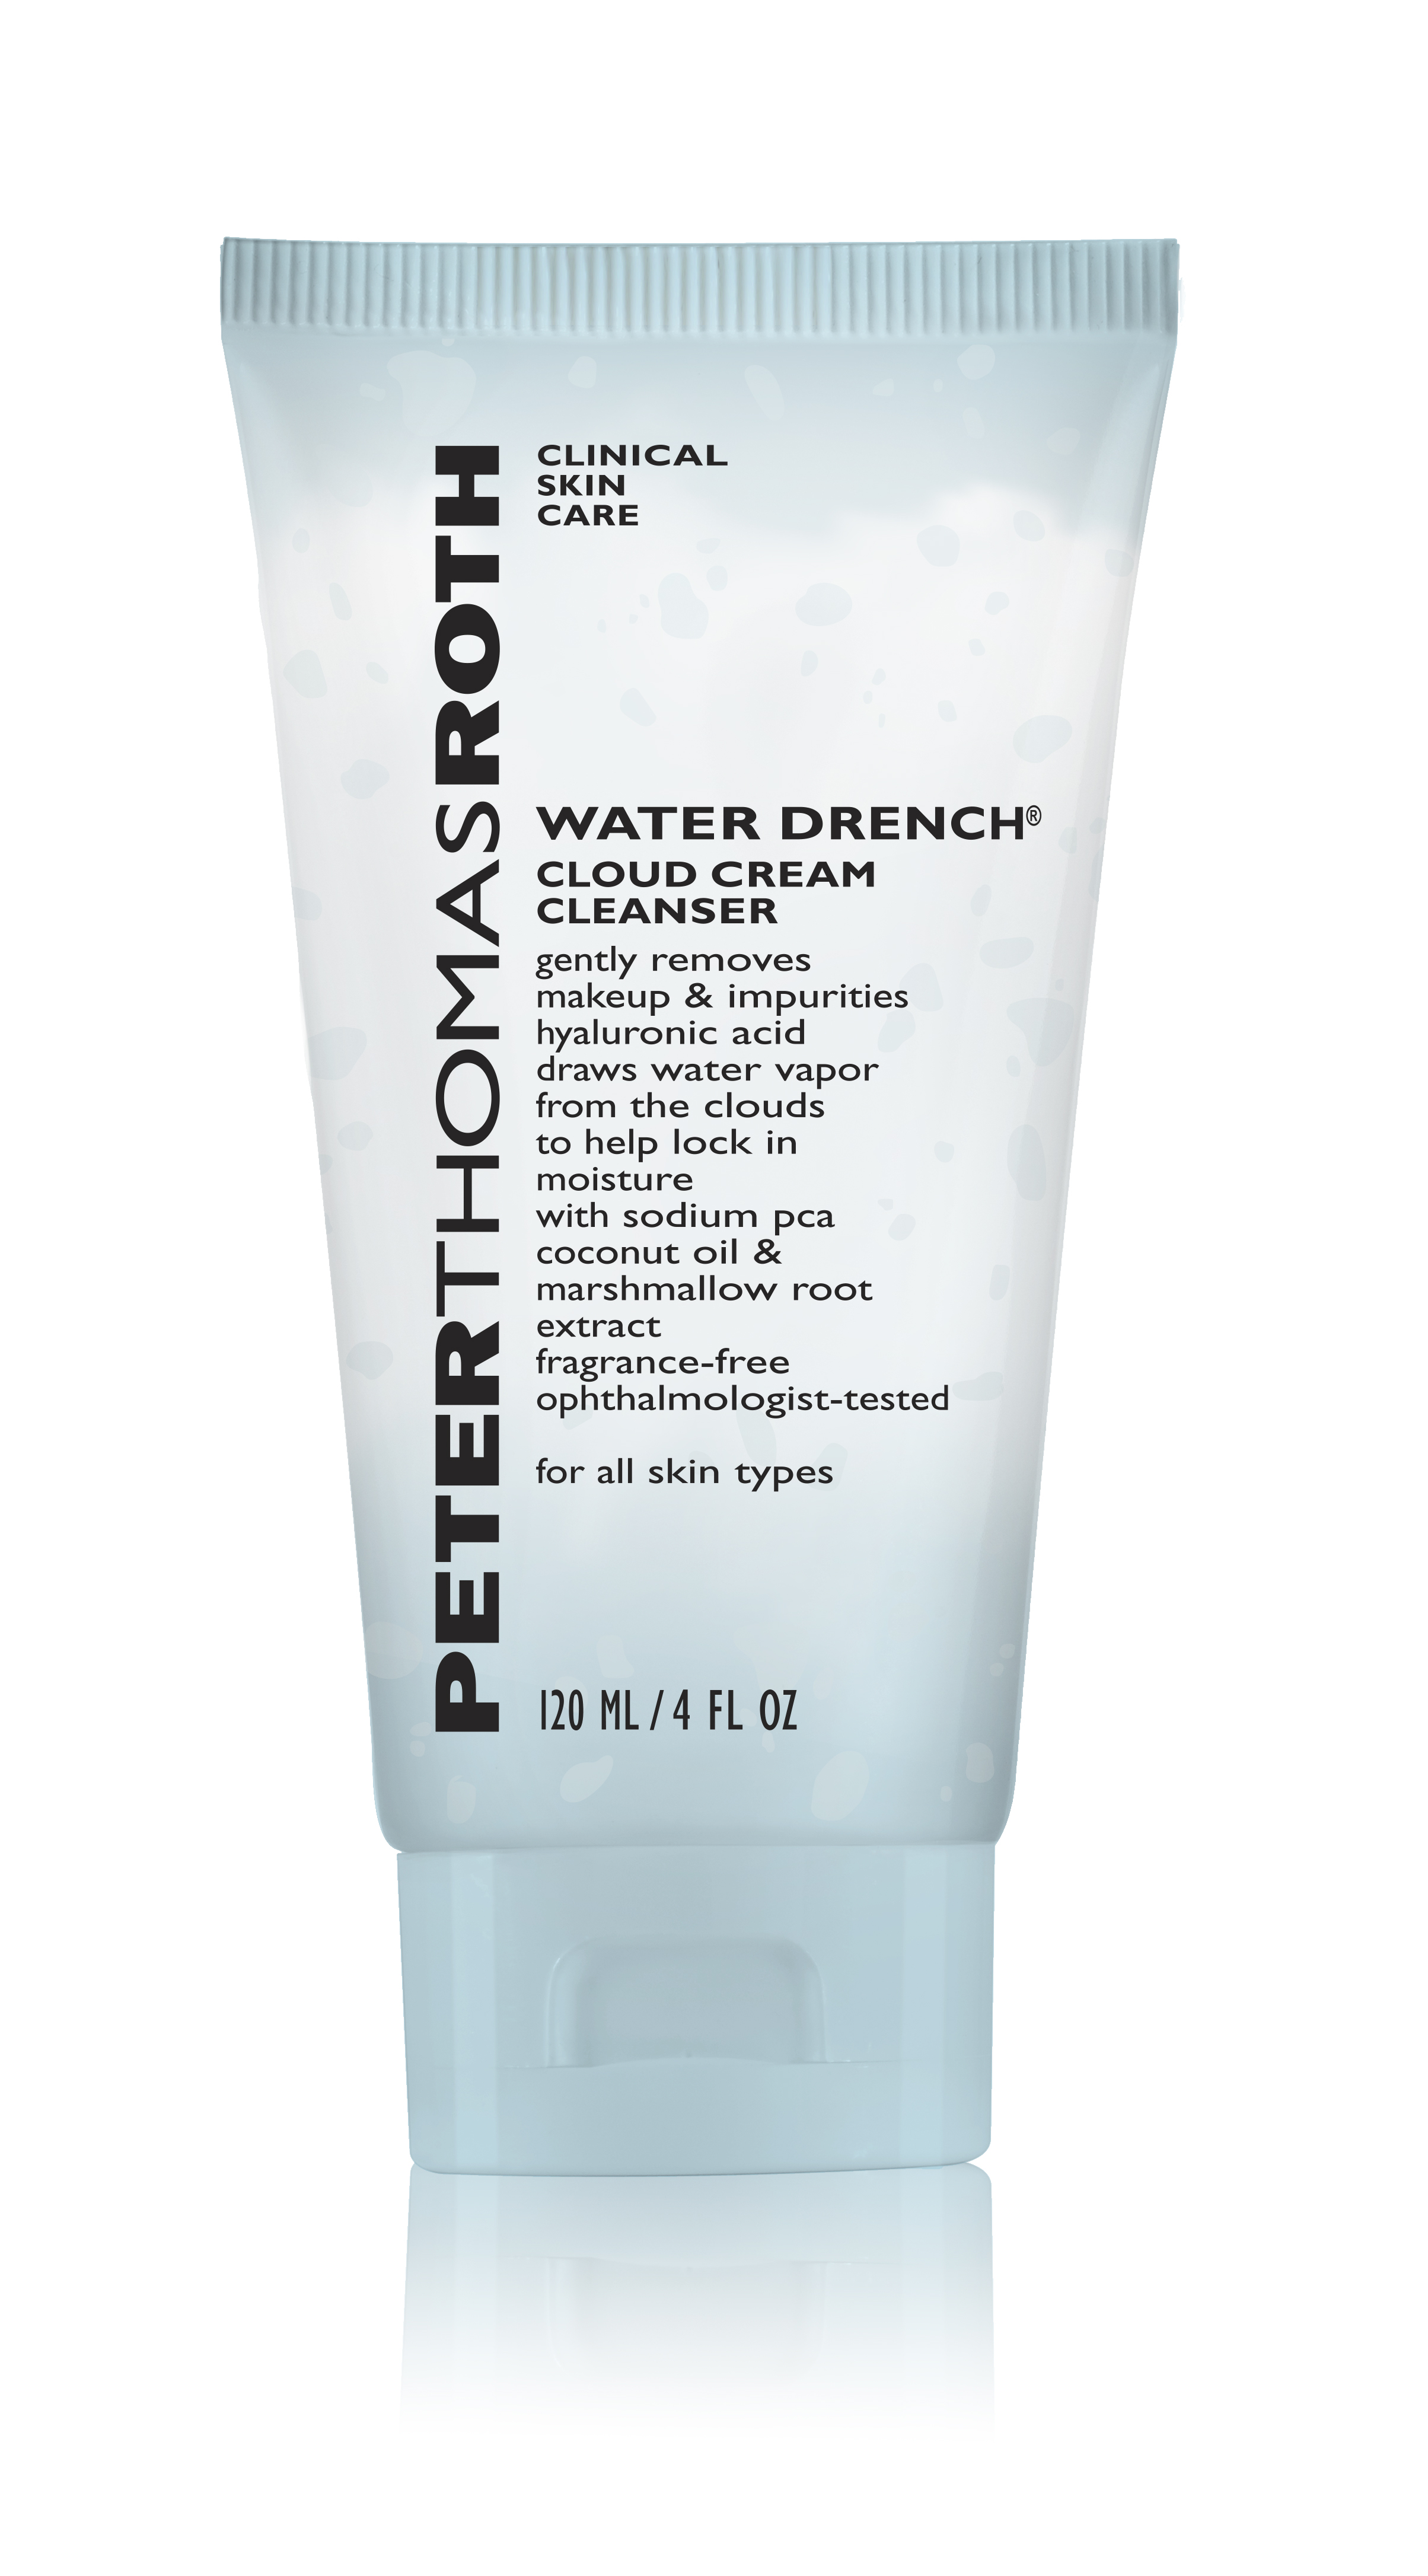 Billede af Peter Thomas Roth Water Drench Cloud Cream Cleanser 120 ml.